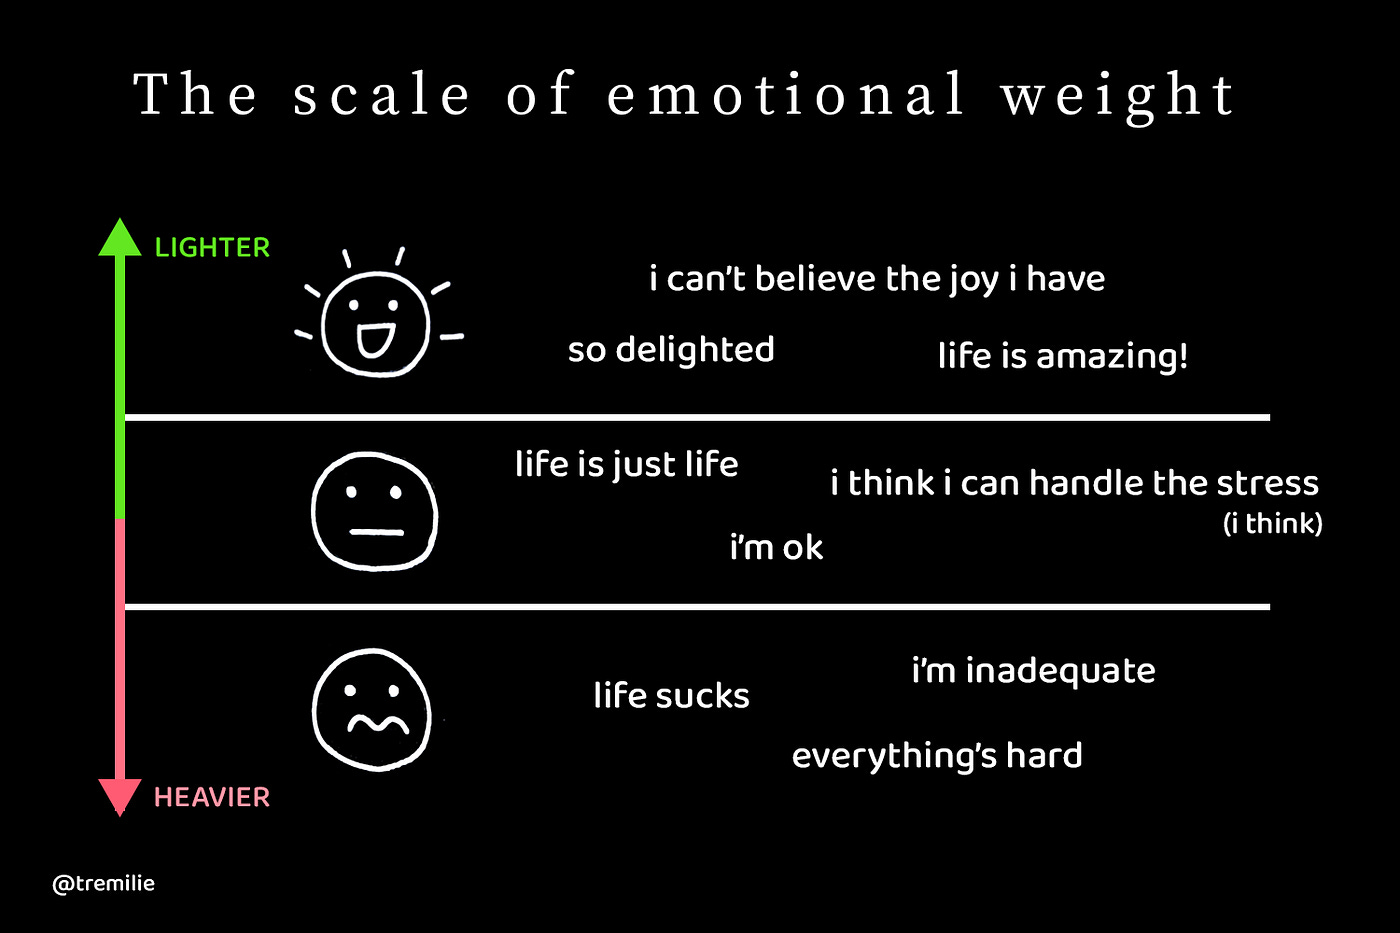 The scale of emotional weight, representing lighter thoughts, neutral thoughts, and heavier thoughts.